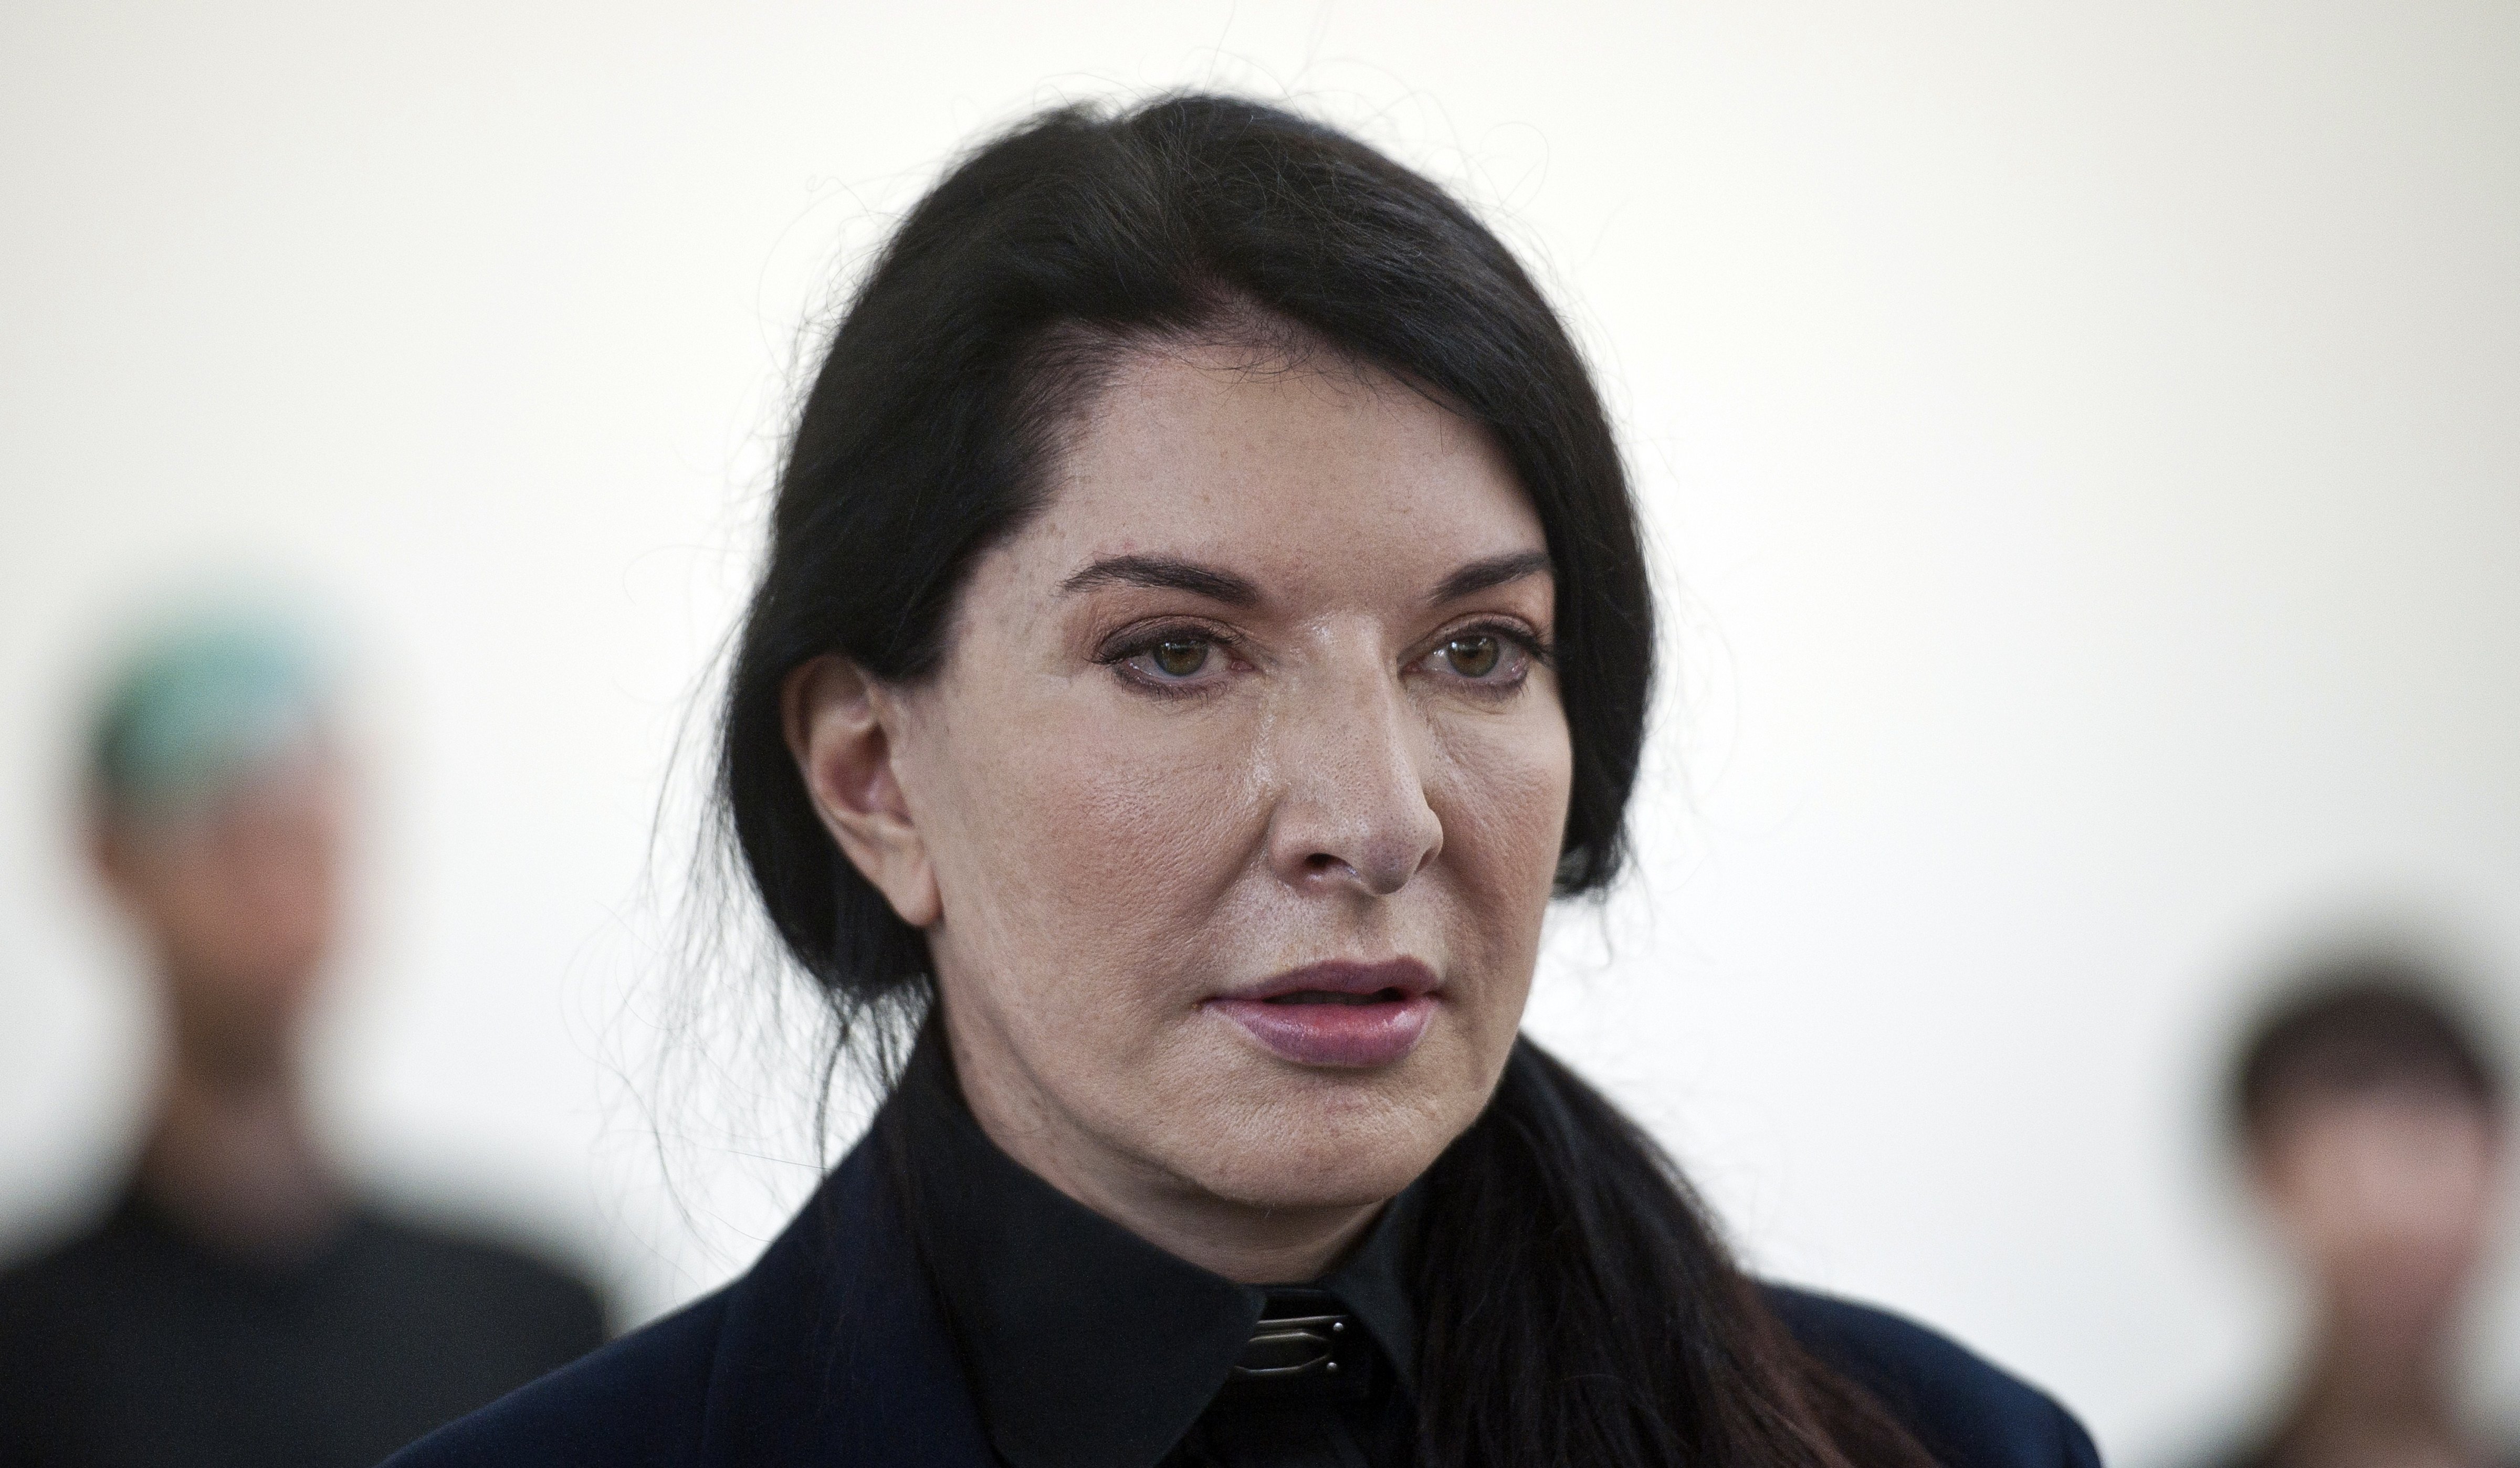 Serbian-born performance artist Marina Abramovic attends a press conference to announce her latest durational performance at the Serpentine Gallery in Hyde Park, central London on June 9, 2014. The performance will last for a total of 512 hours and will begin on June 11. (WILL OLIVER--AFP/Getty Images)